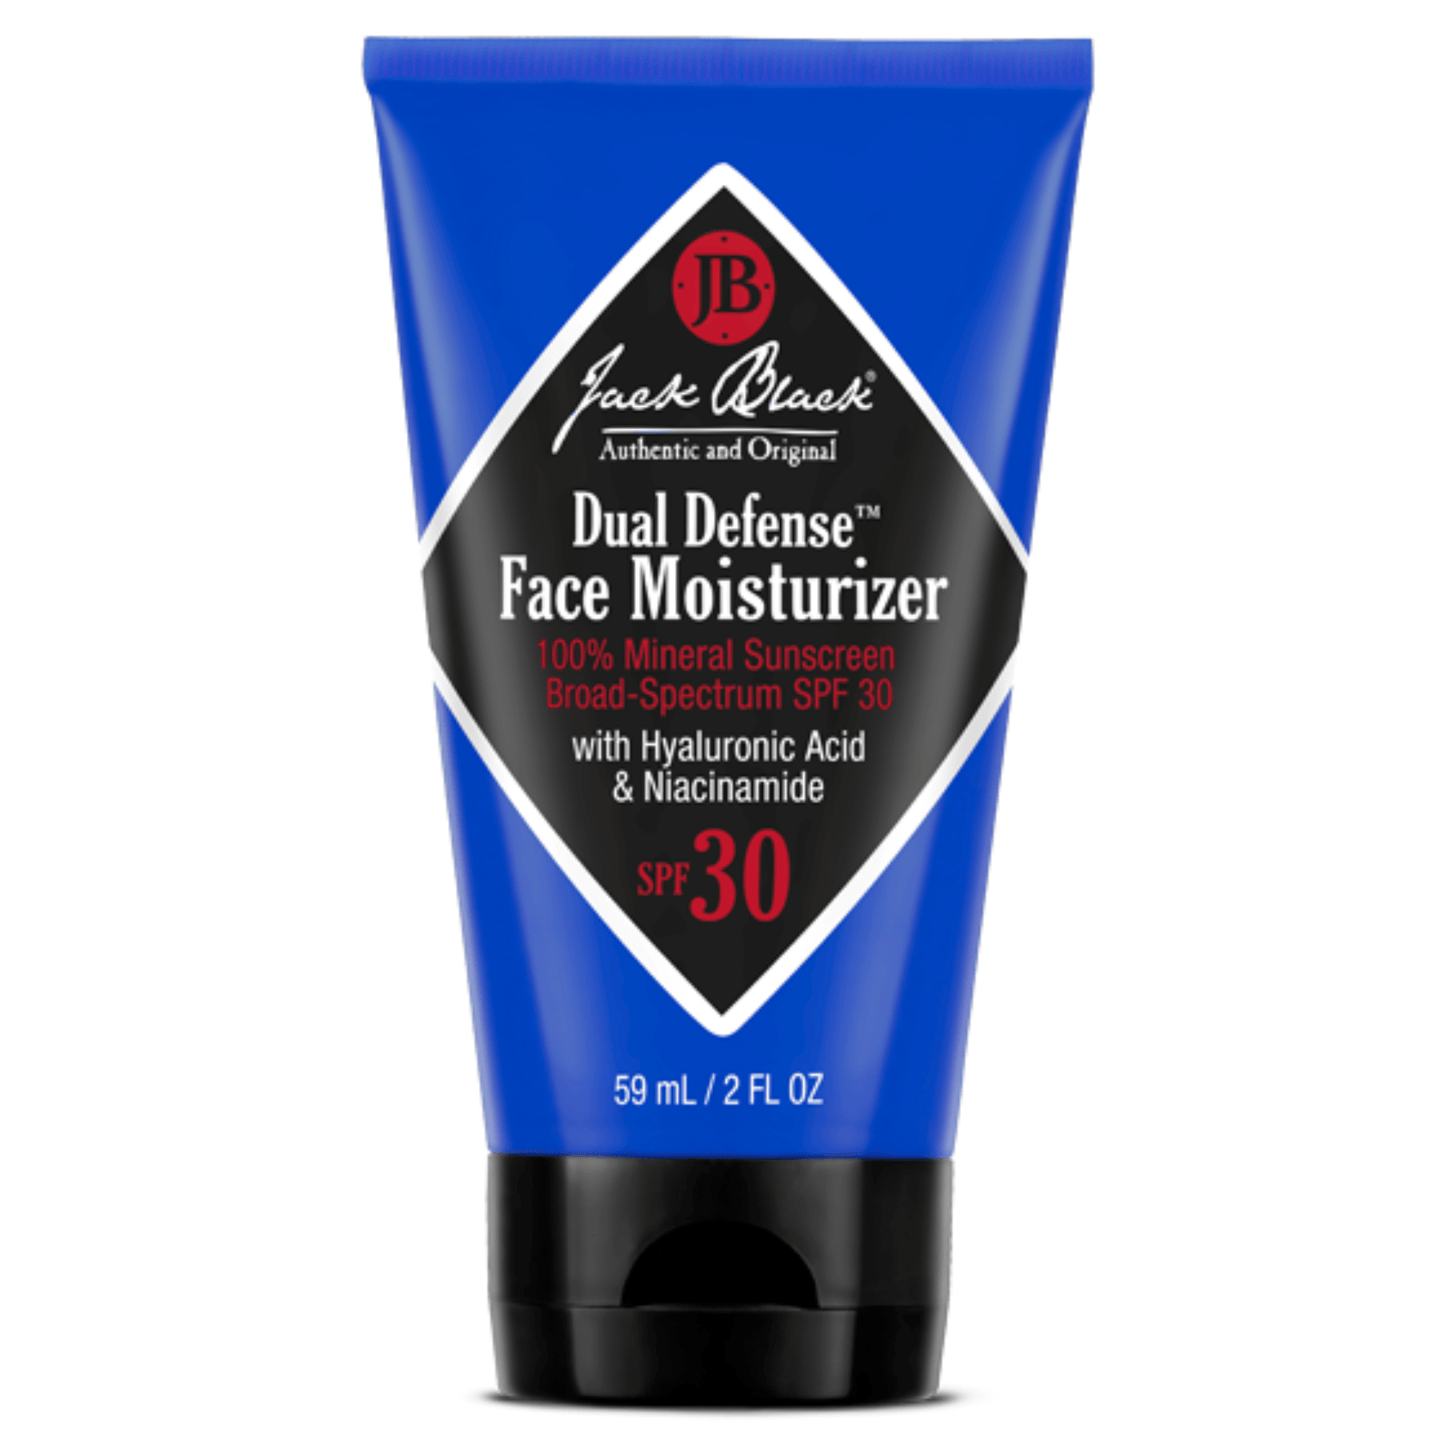 Primary Image of Dual Defense Face Moisturizer SPF 30